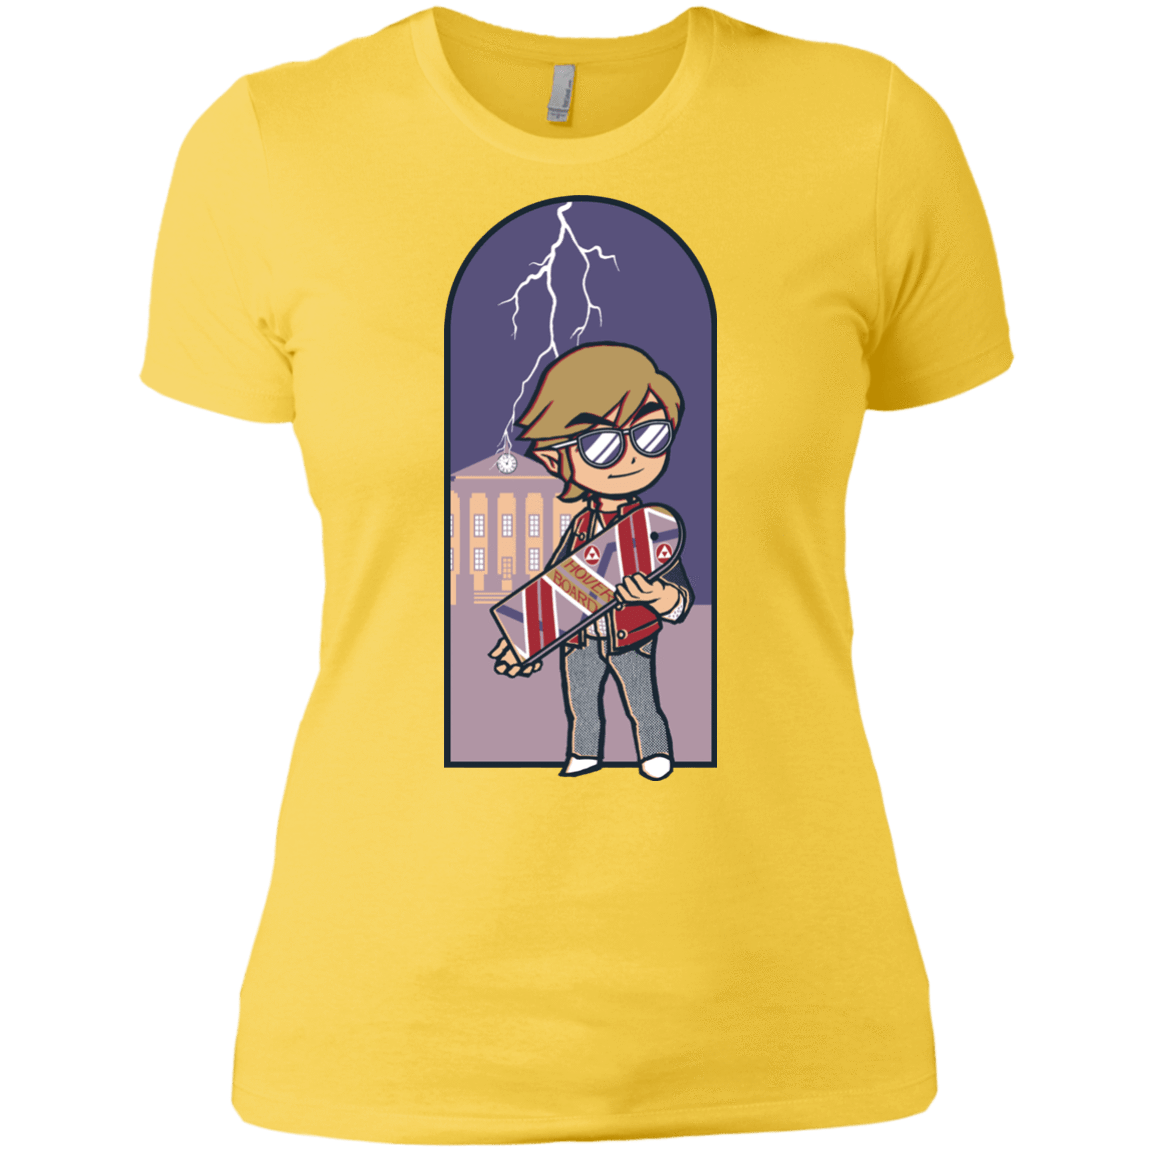 T-Shirts Vibrant Yellow / X-Small A Link to The Future Women's Premium T-Shirt